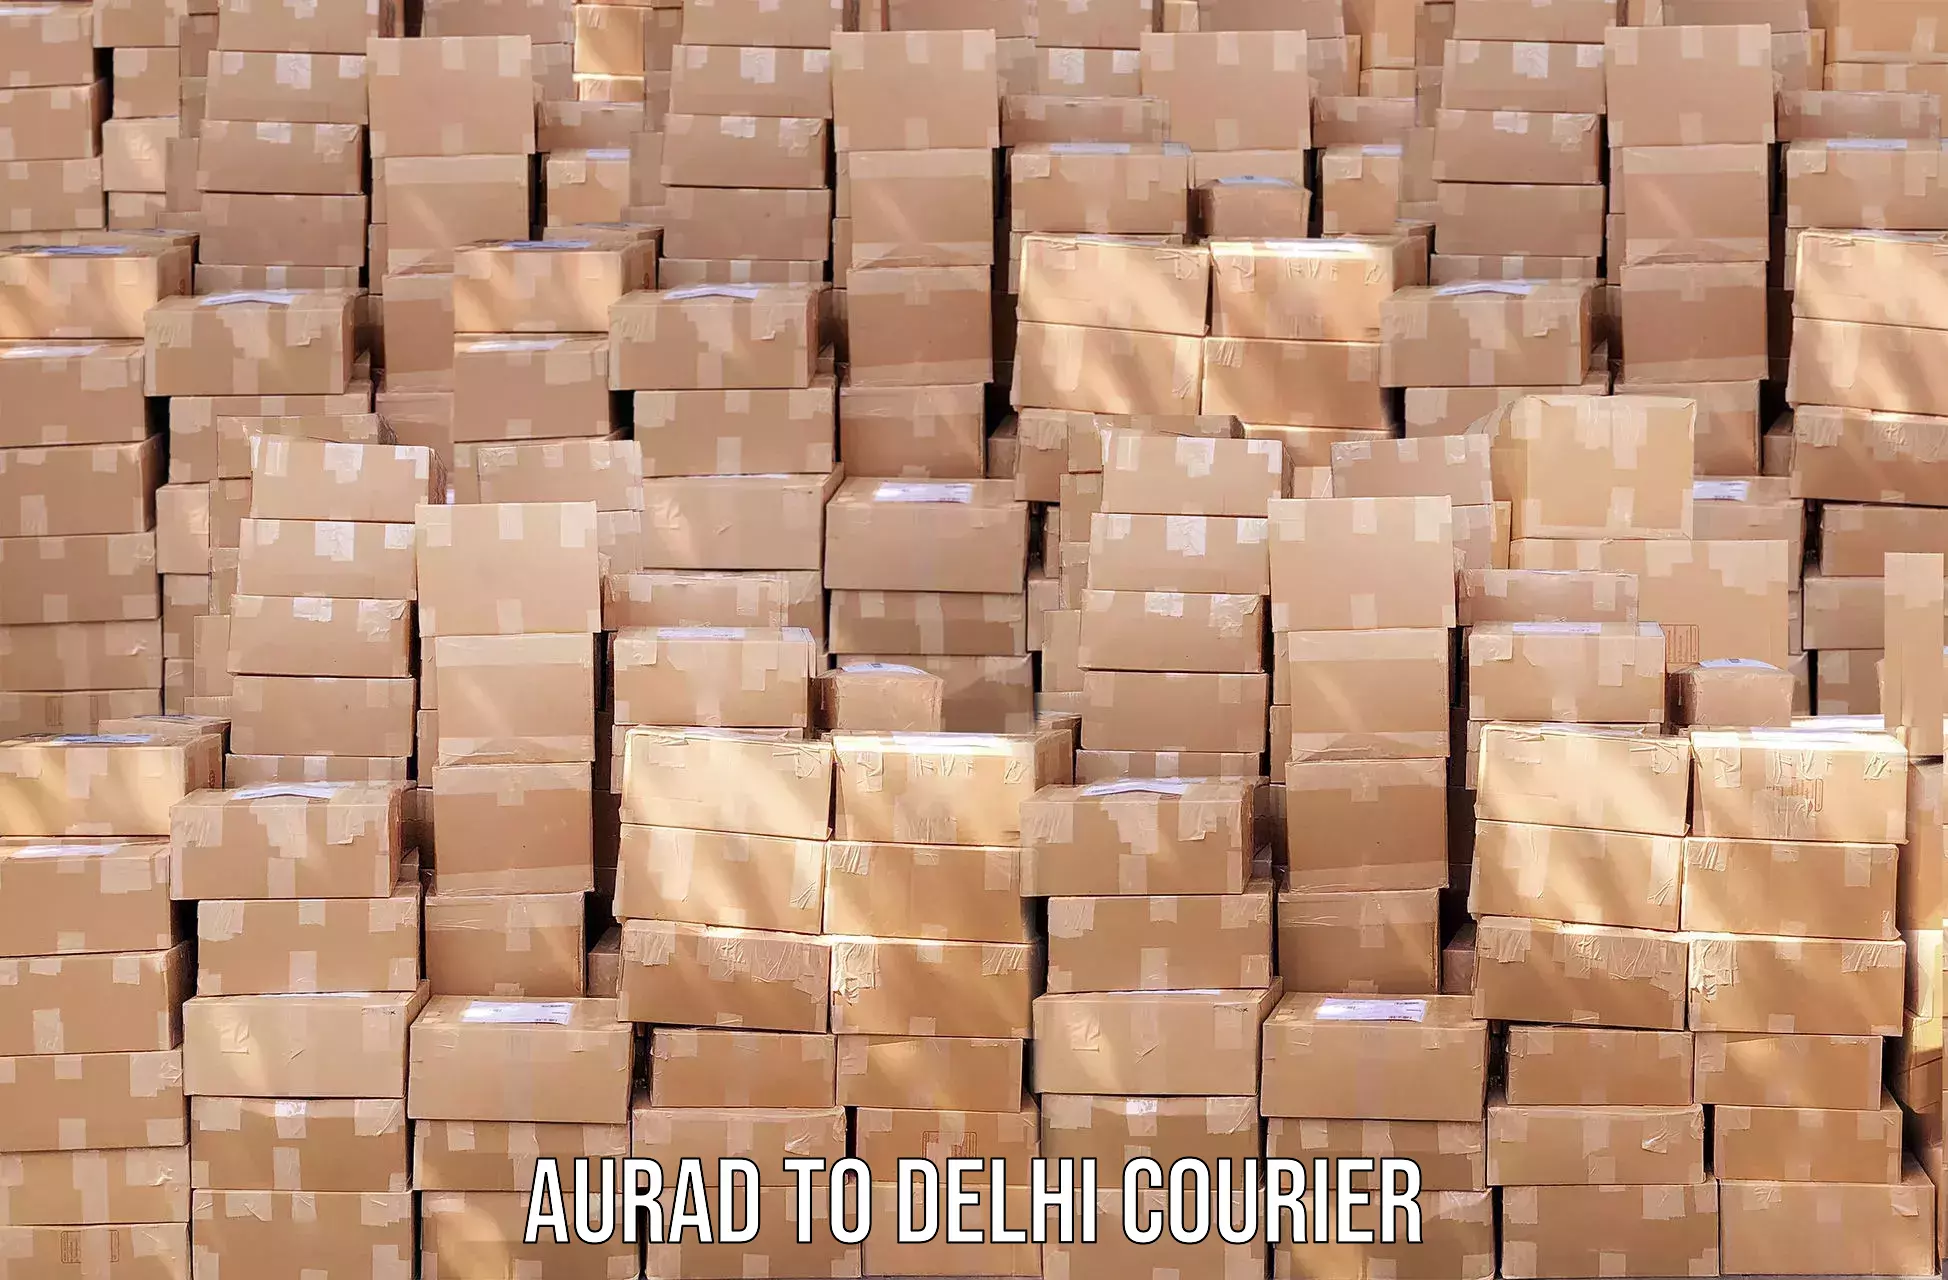 Courier service partnerships in Aurad to NCR